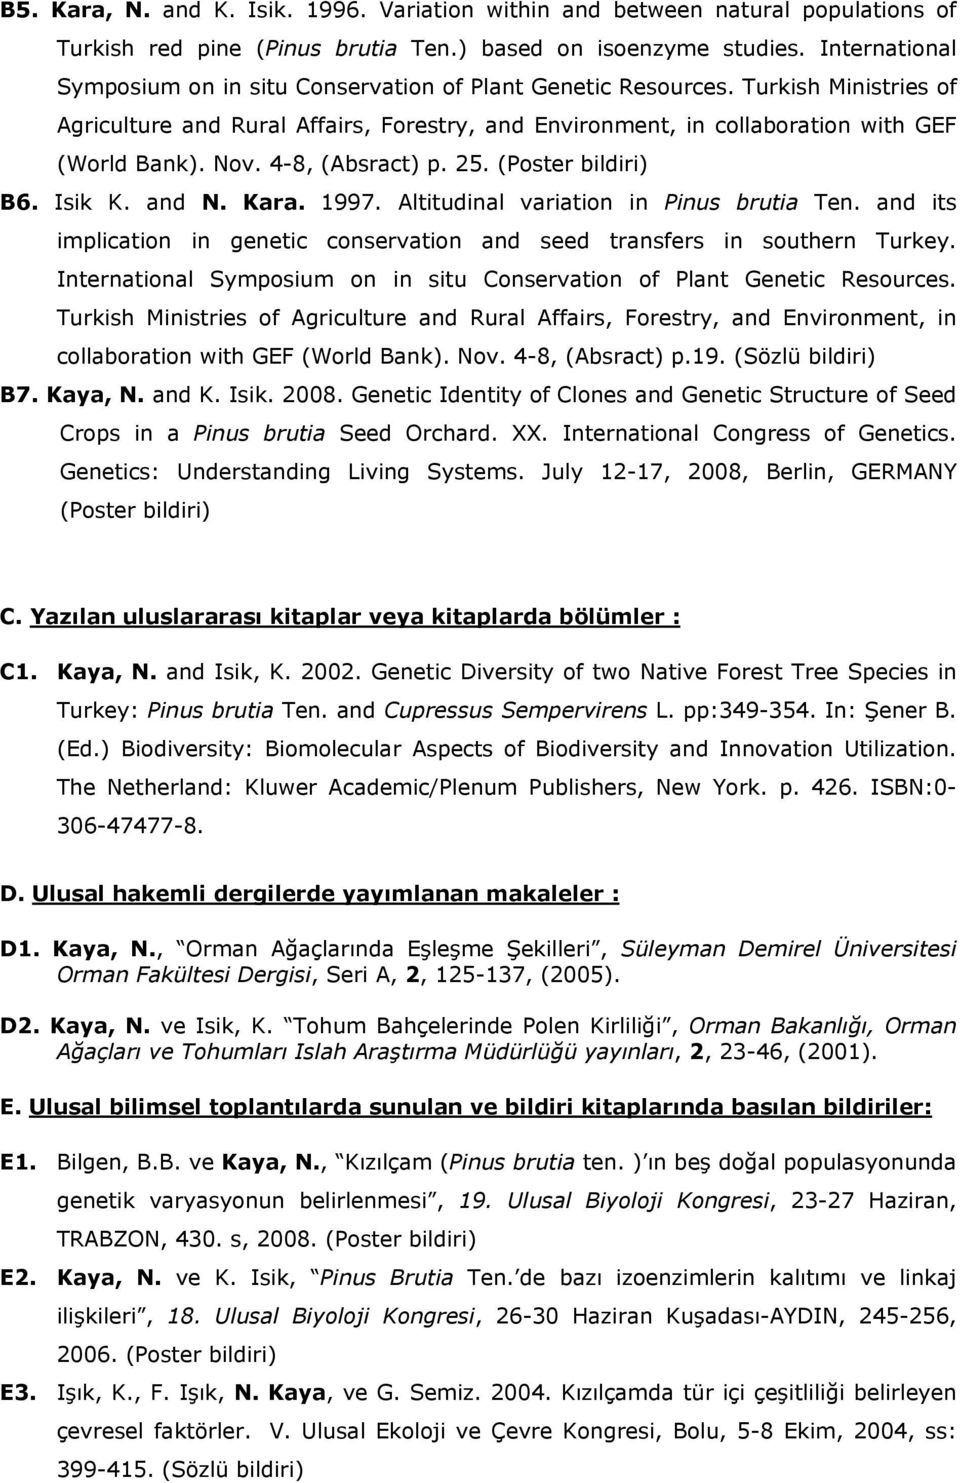 4-8, (Absract) p. 25. (Poster bildiri) B6. Isik K. and N. Kara. 1997. Altitudinal variation in Pinus brutia Ten. and its implication in genetic conservation and seed transfers in southern Turkey.